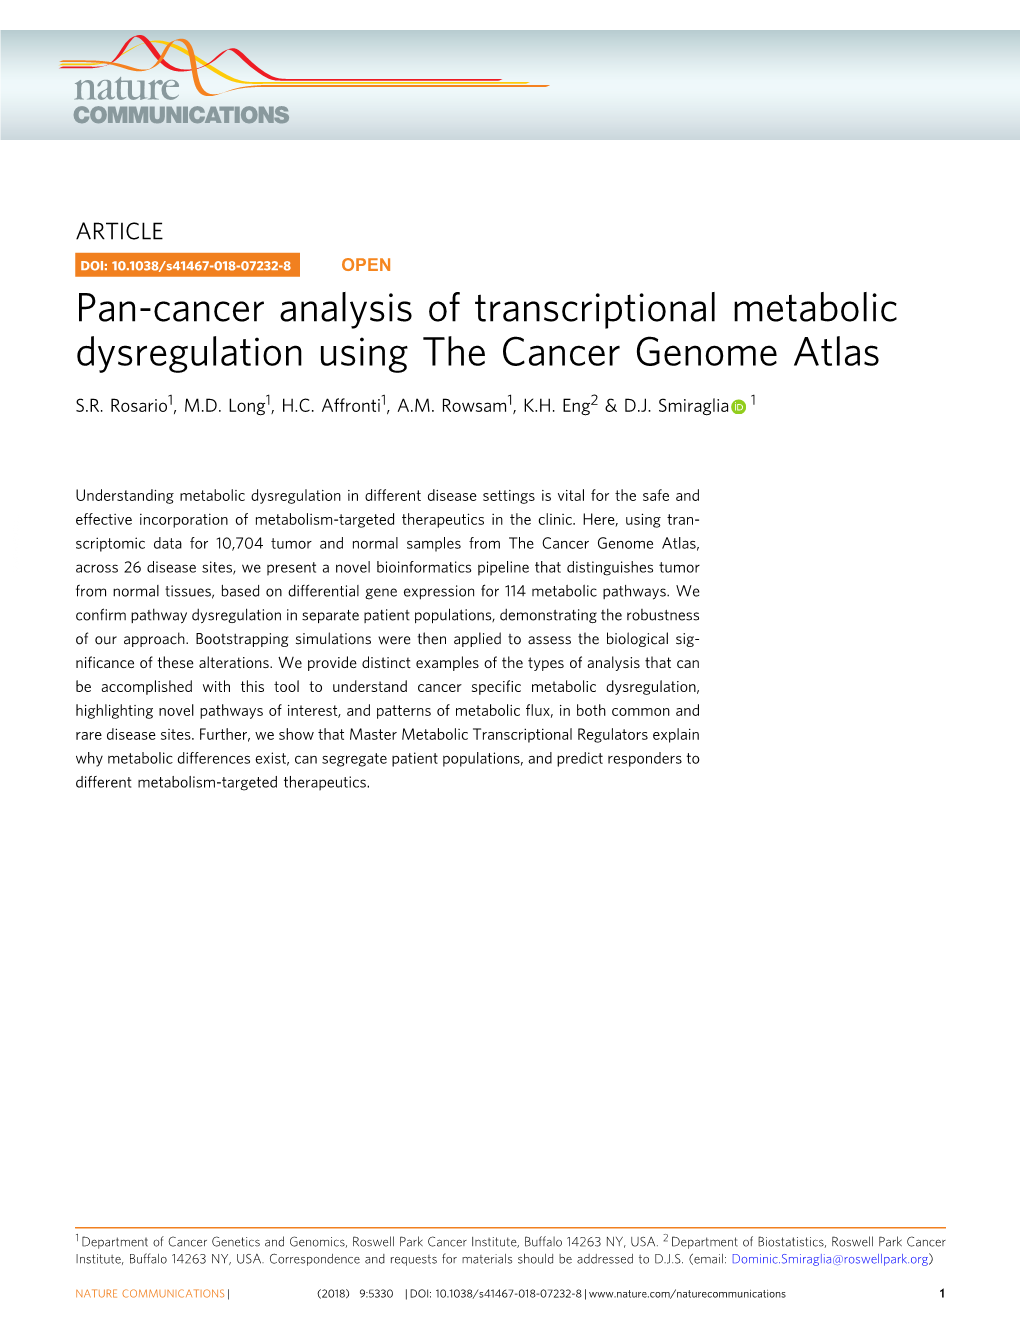 Pan-Cancer Analysis of Transcriptional Metabolic Dysregulation Using the Cancer Genome Atlas